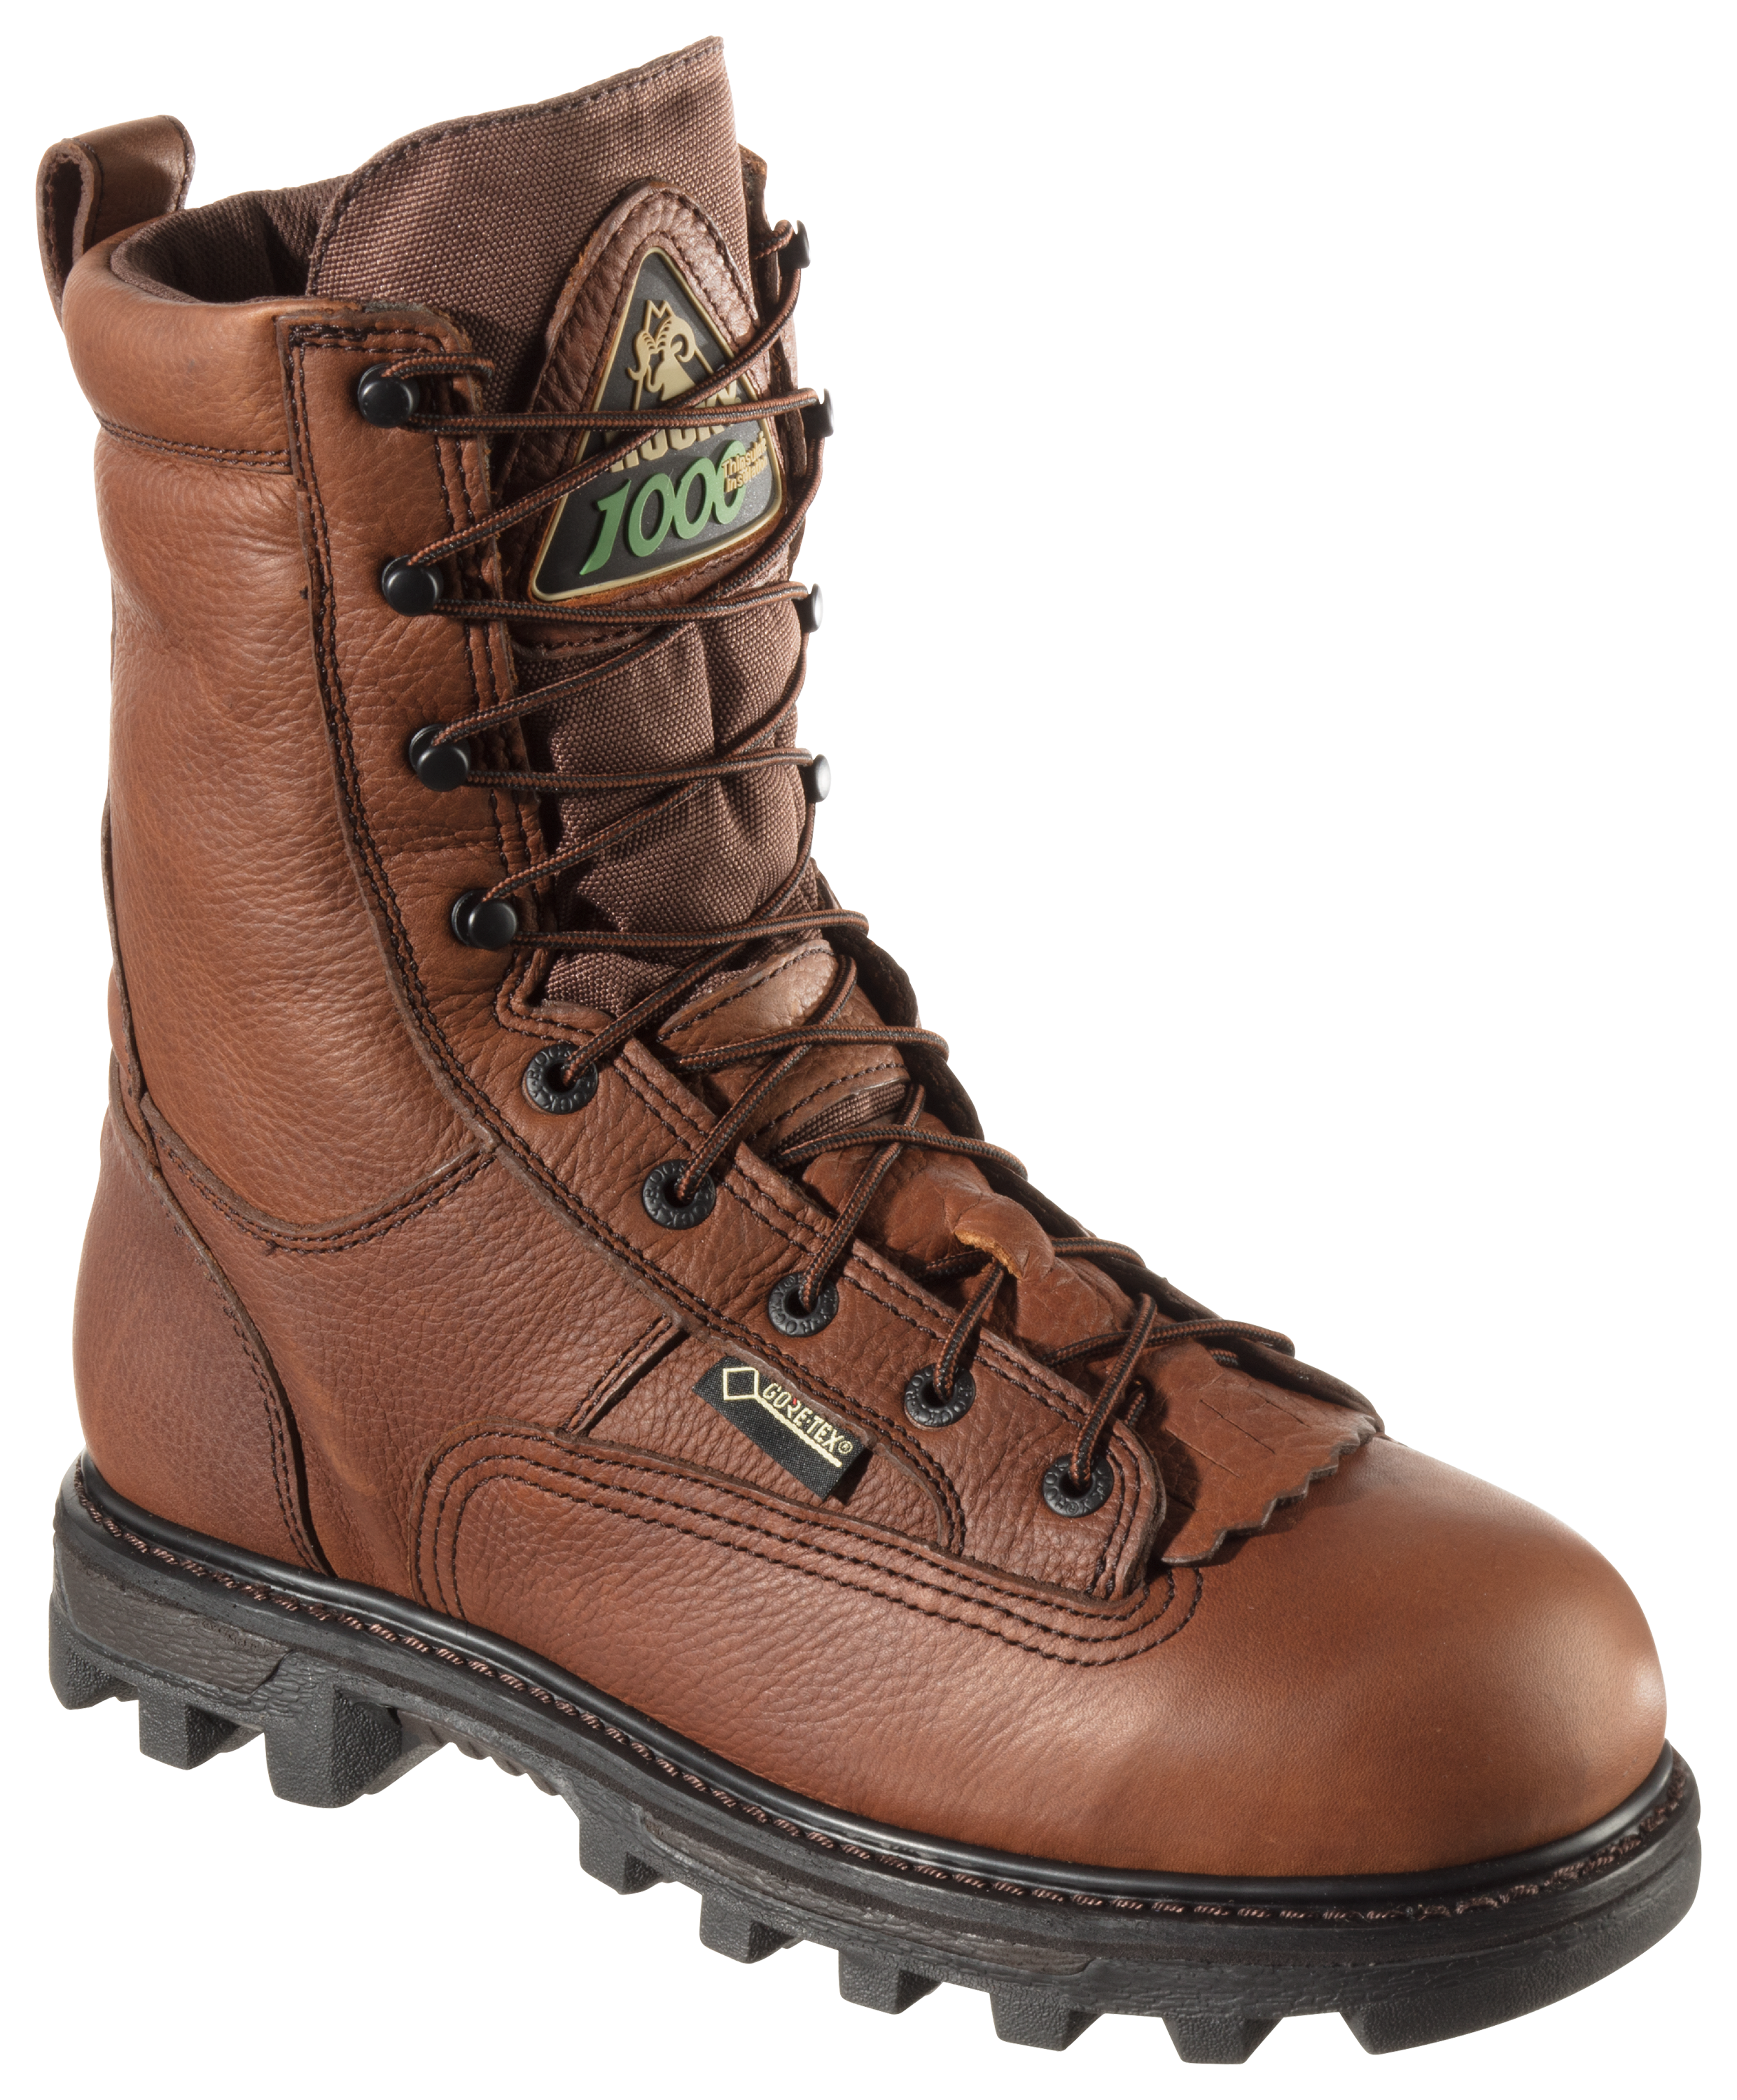 ROCKY BearClaw 3D GORE-TEX 1,000-Gram Insulated Hunting Boots for Men - Brown - 9.5W